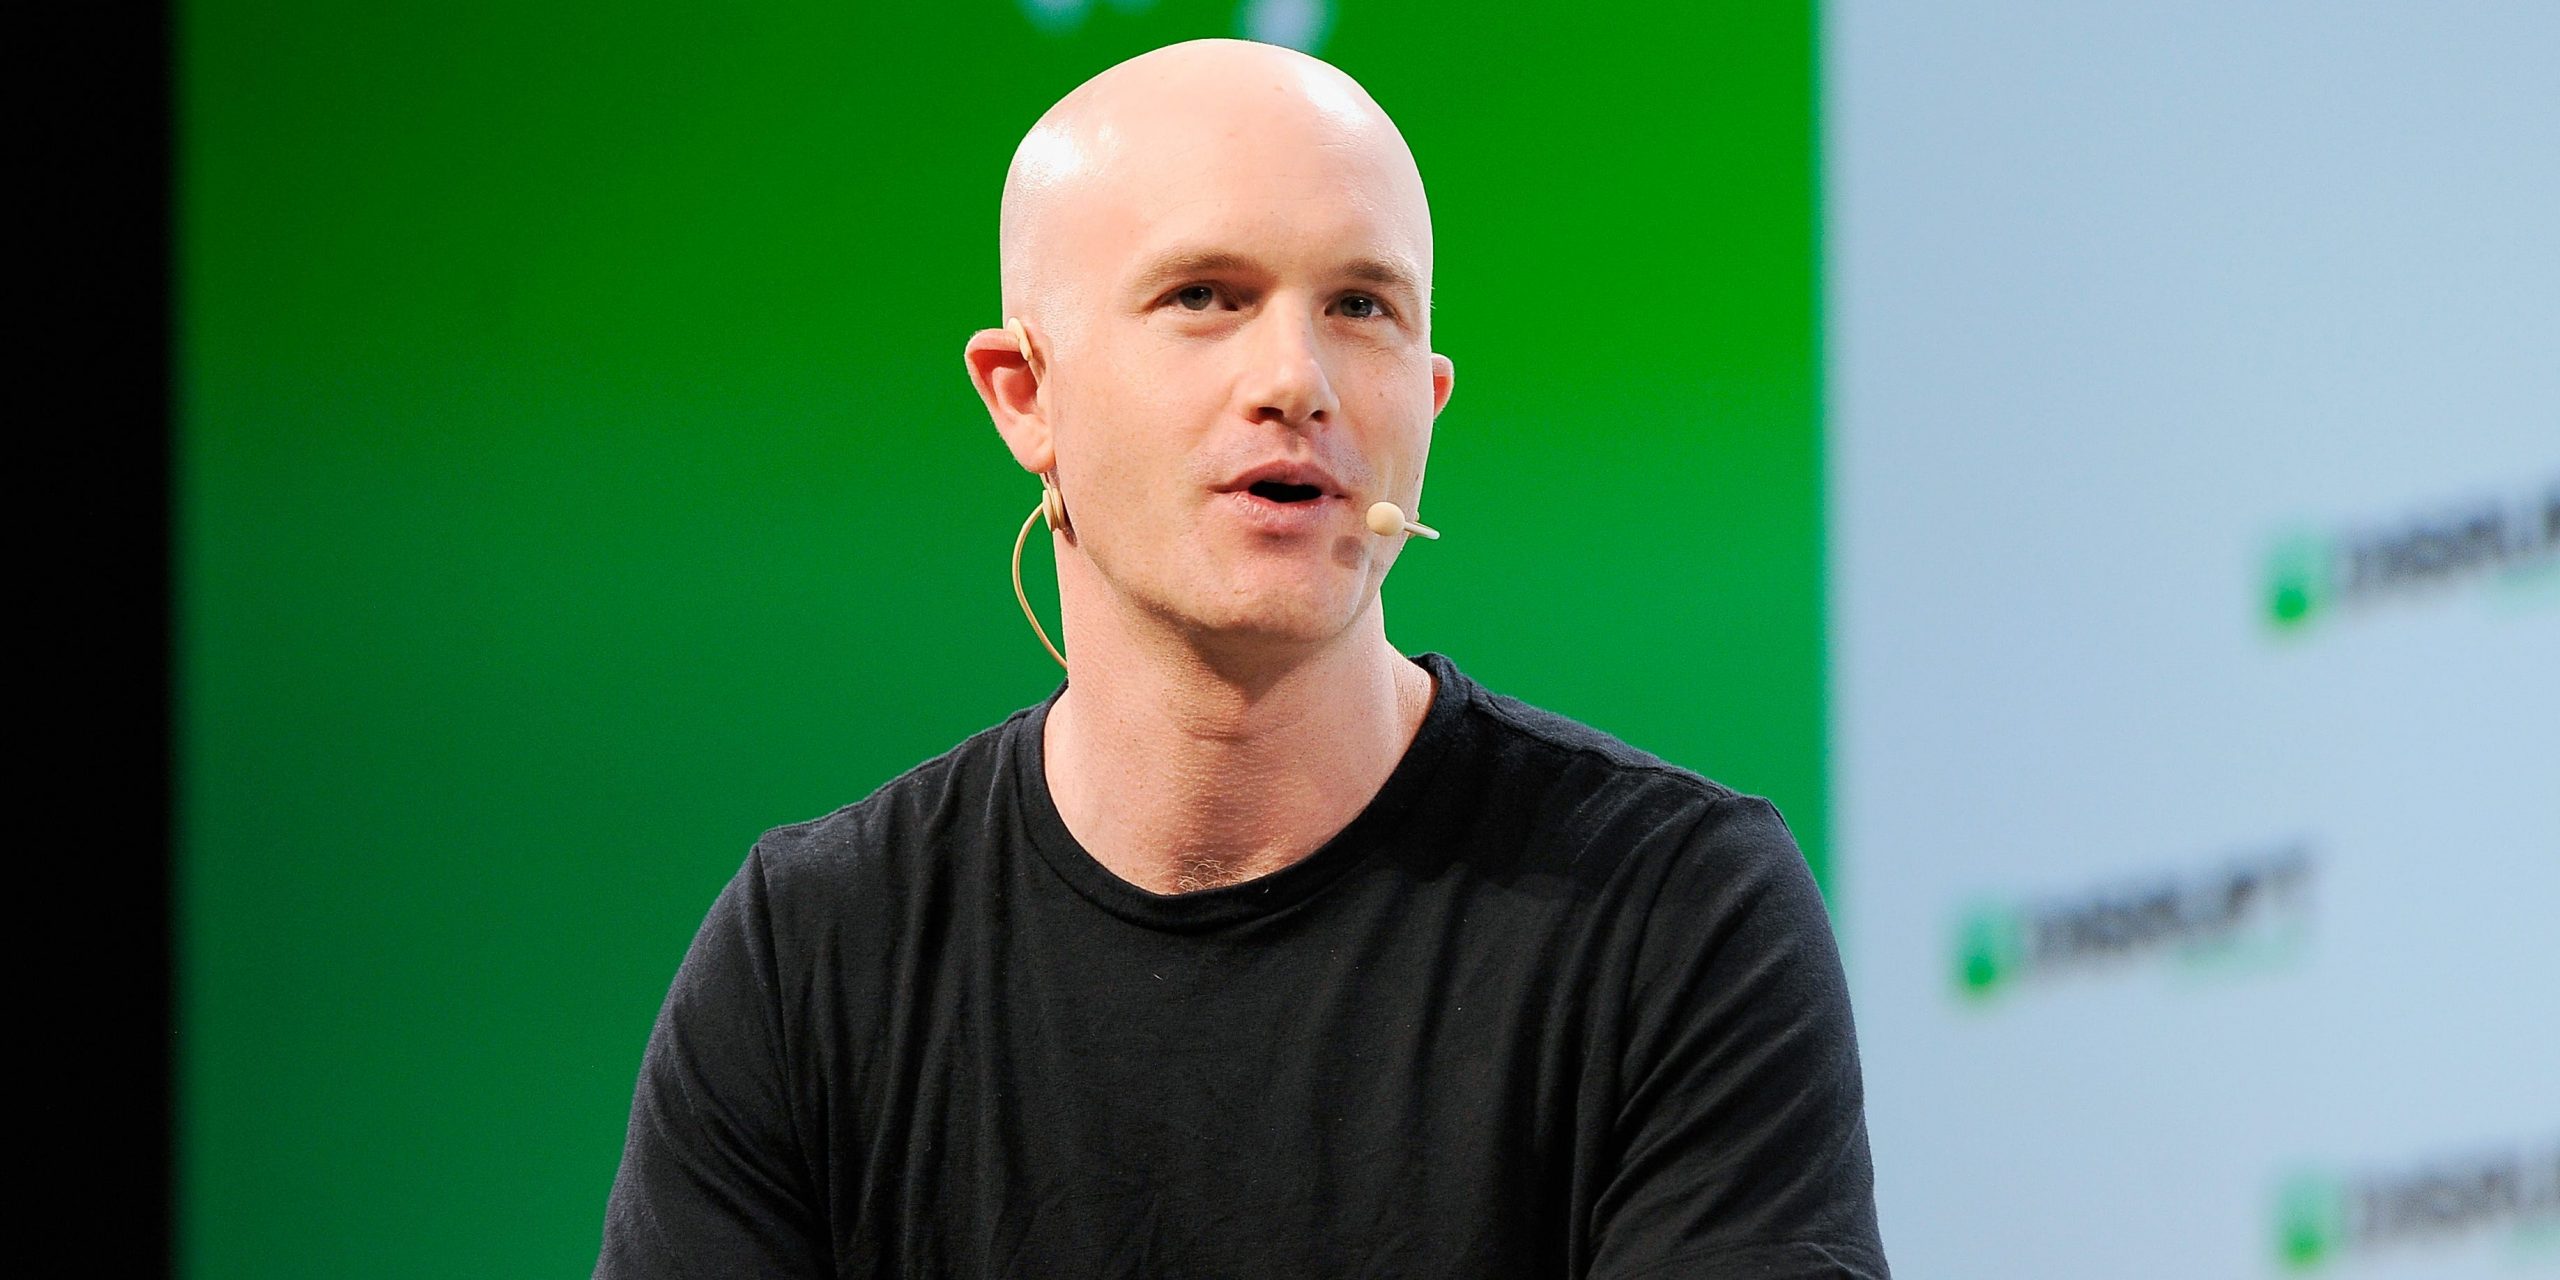 Coinbase Co-founder and CEO Brian Armstrong speaks on stage in front of a green background